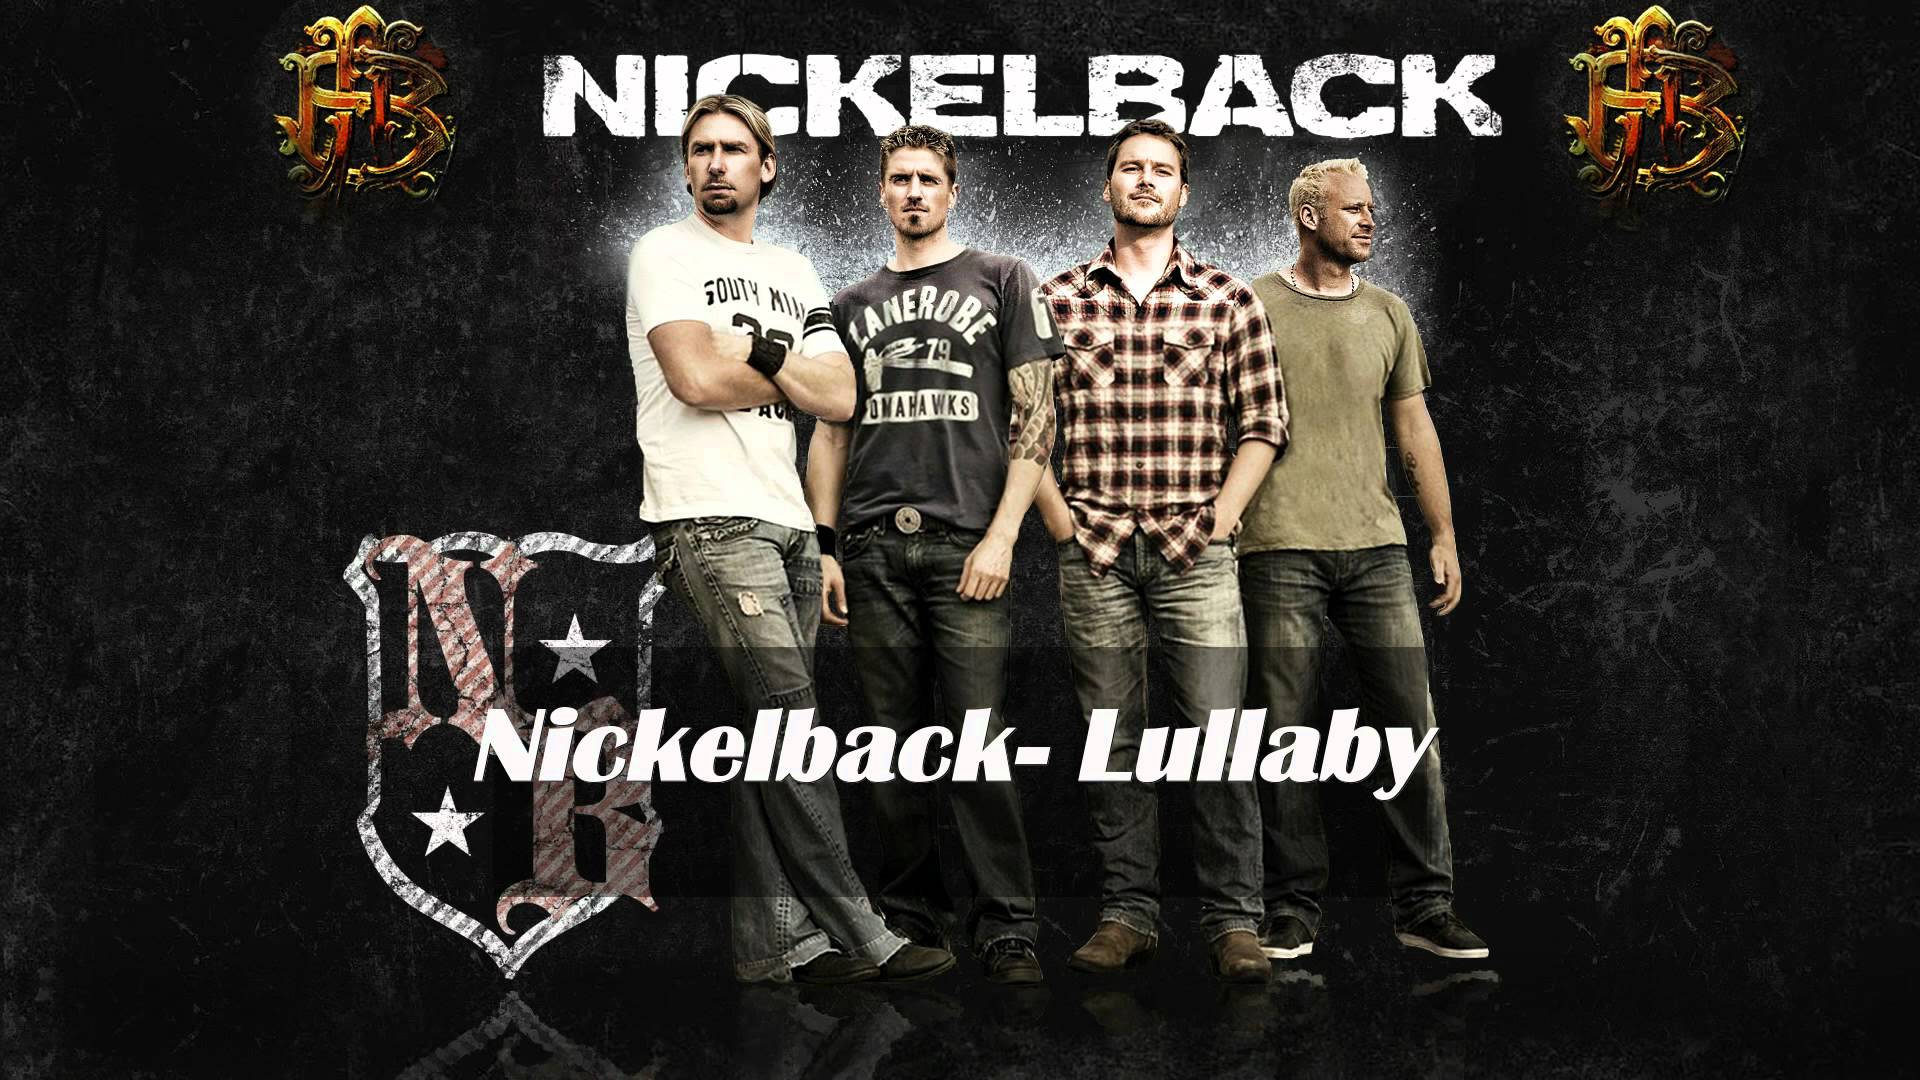 nickelback songs to download free